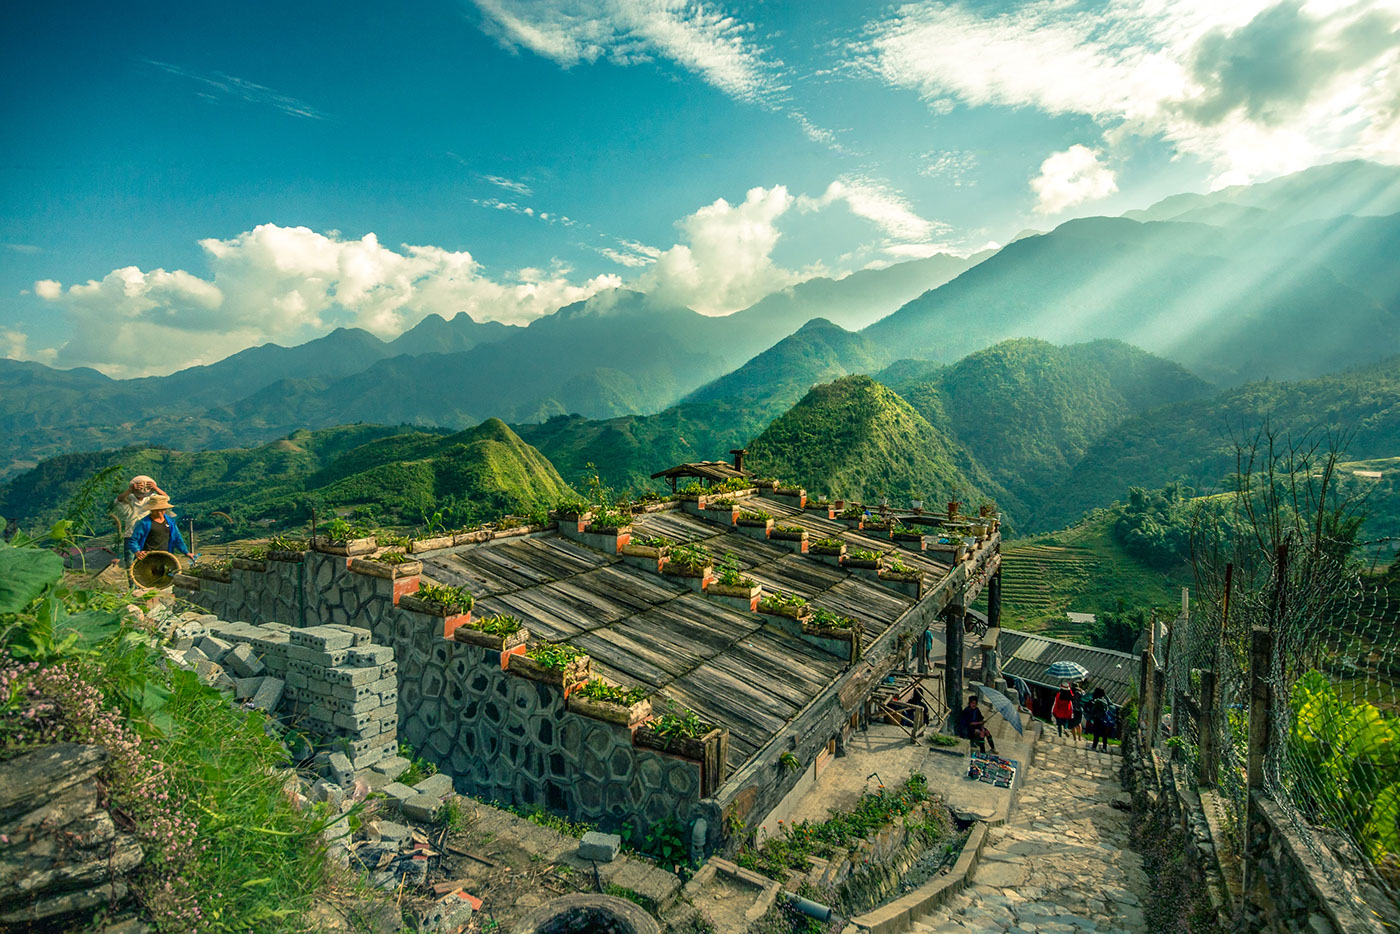 8 must-see places in Sapa in the afternoon